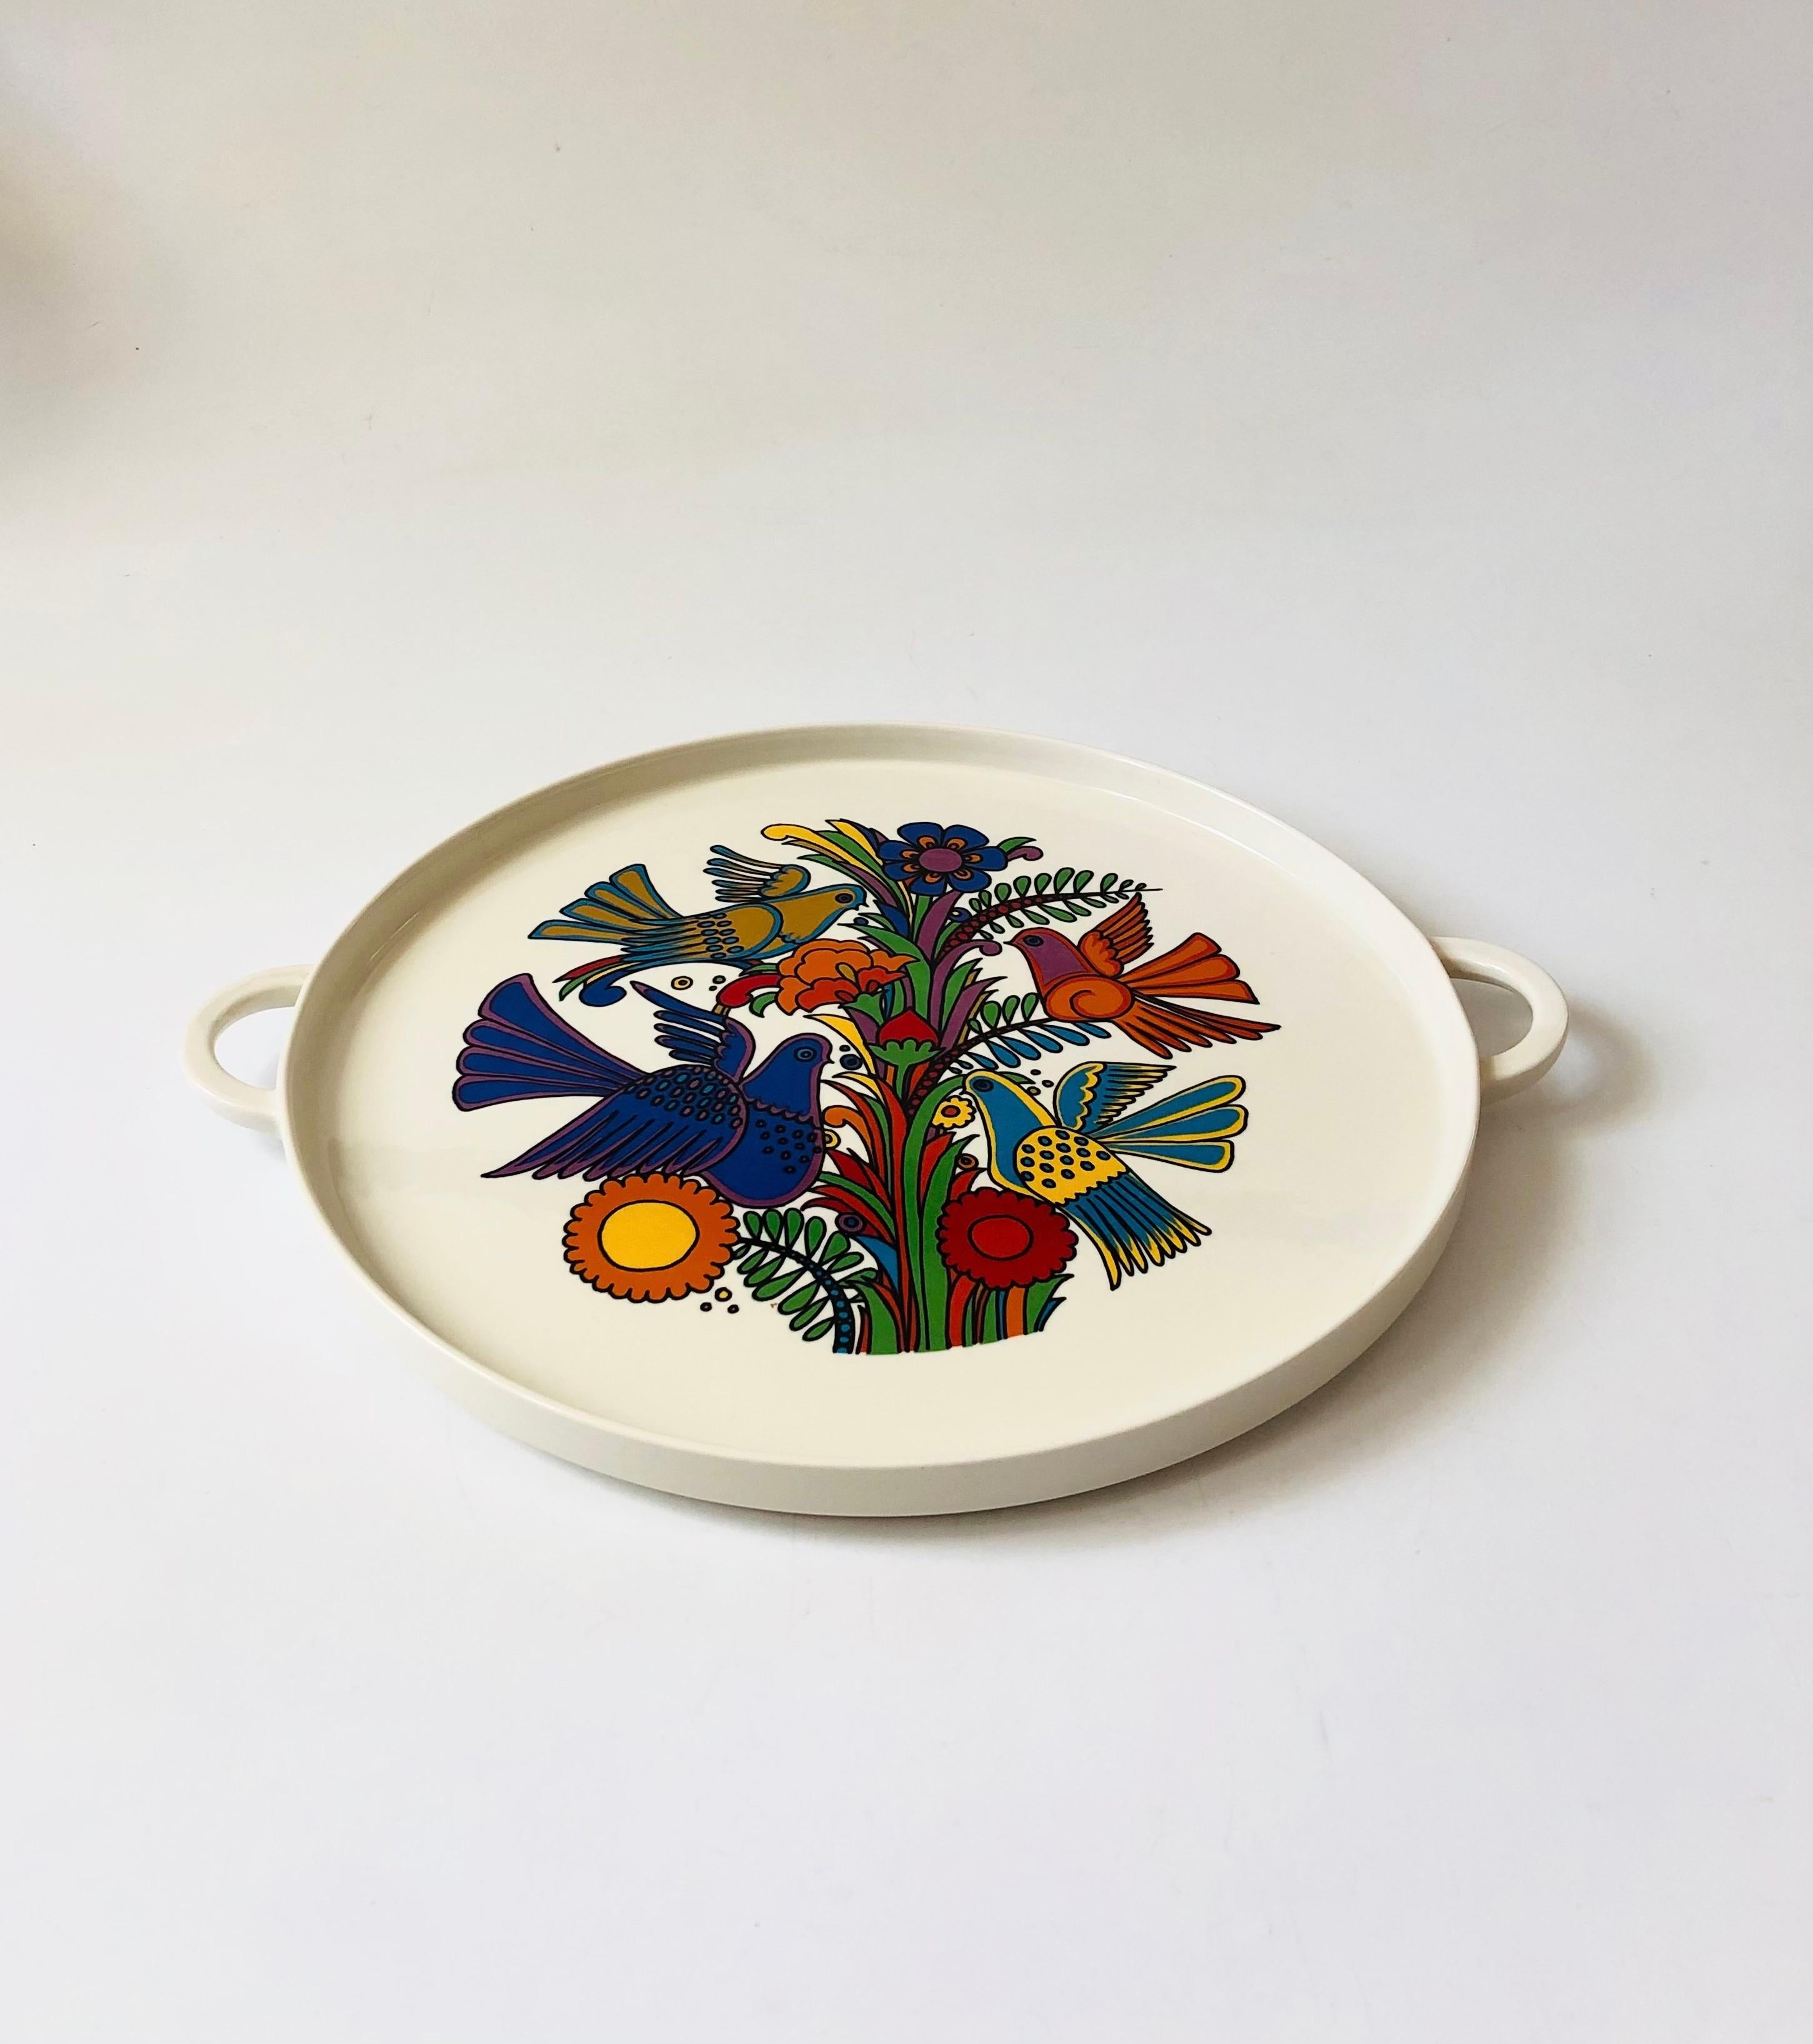 An extra large vintage ceramic serving tray from the 1960s. Features a colorful design of flowers and birds in the center in the Acapulco pattern designed by Christine Reuter. Two handles are formed on the sides. Produced in Luxembourg by Villeroy